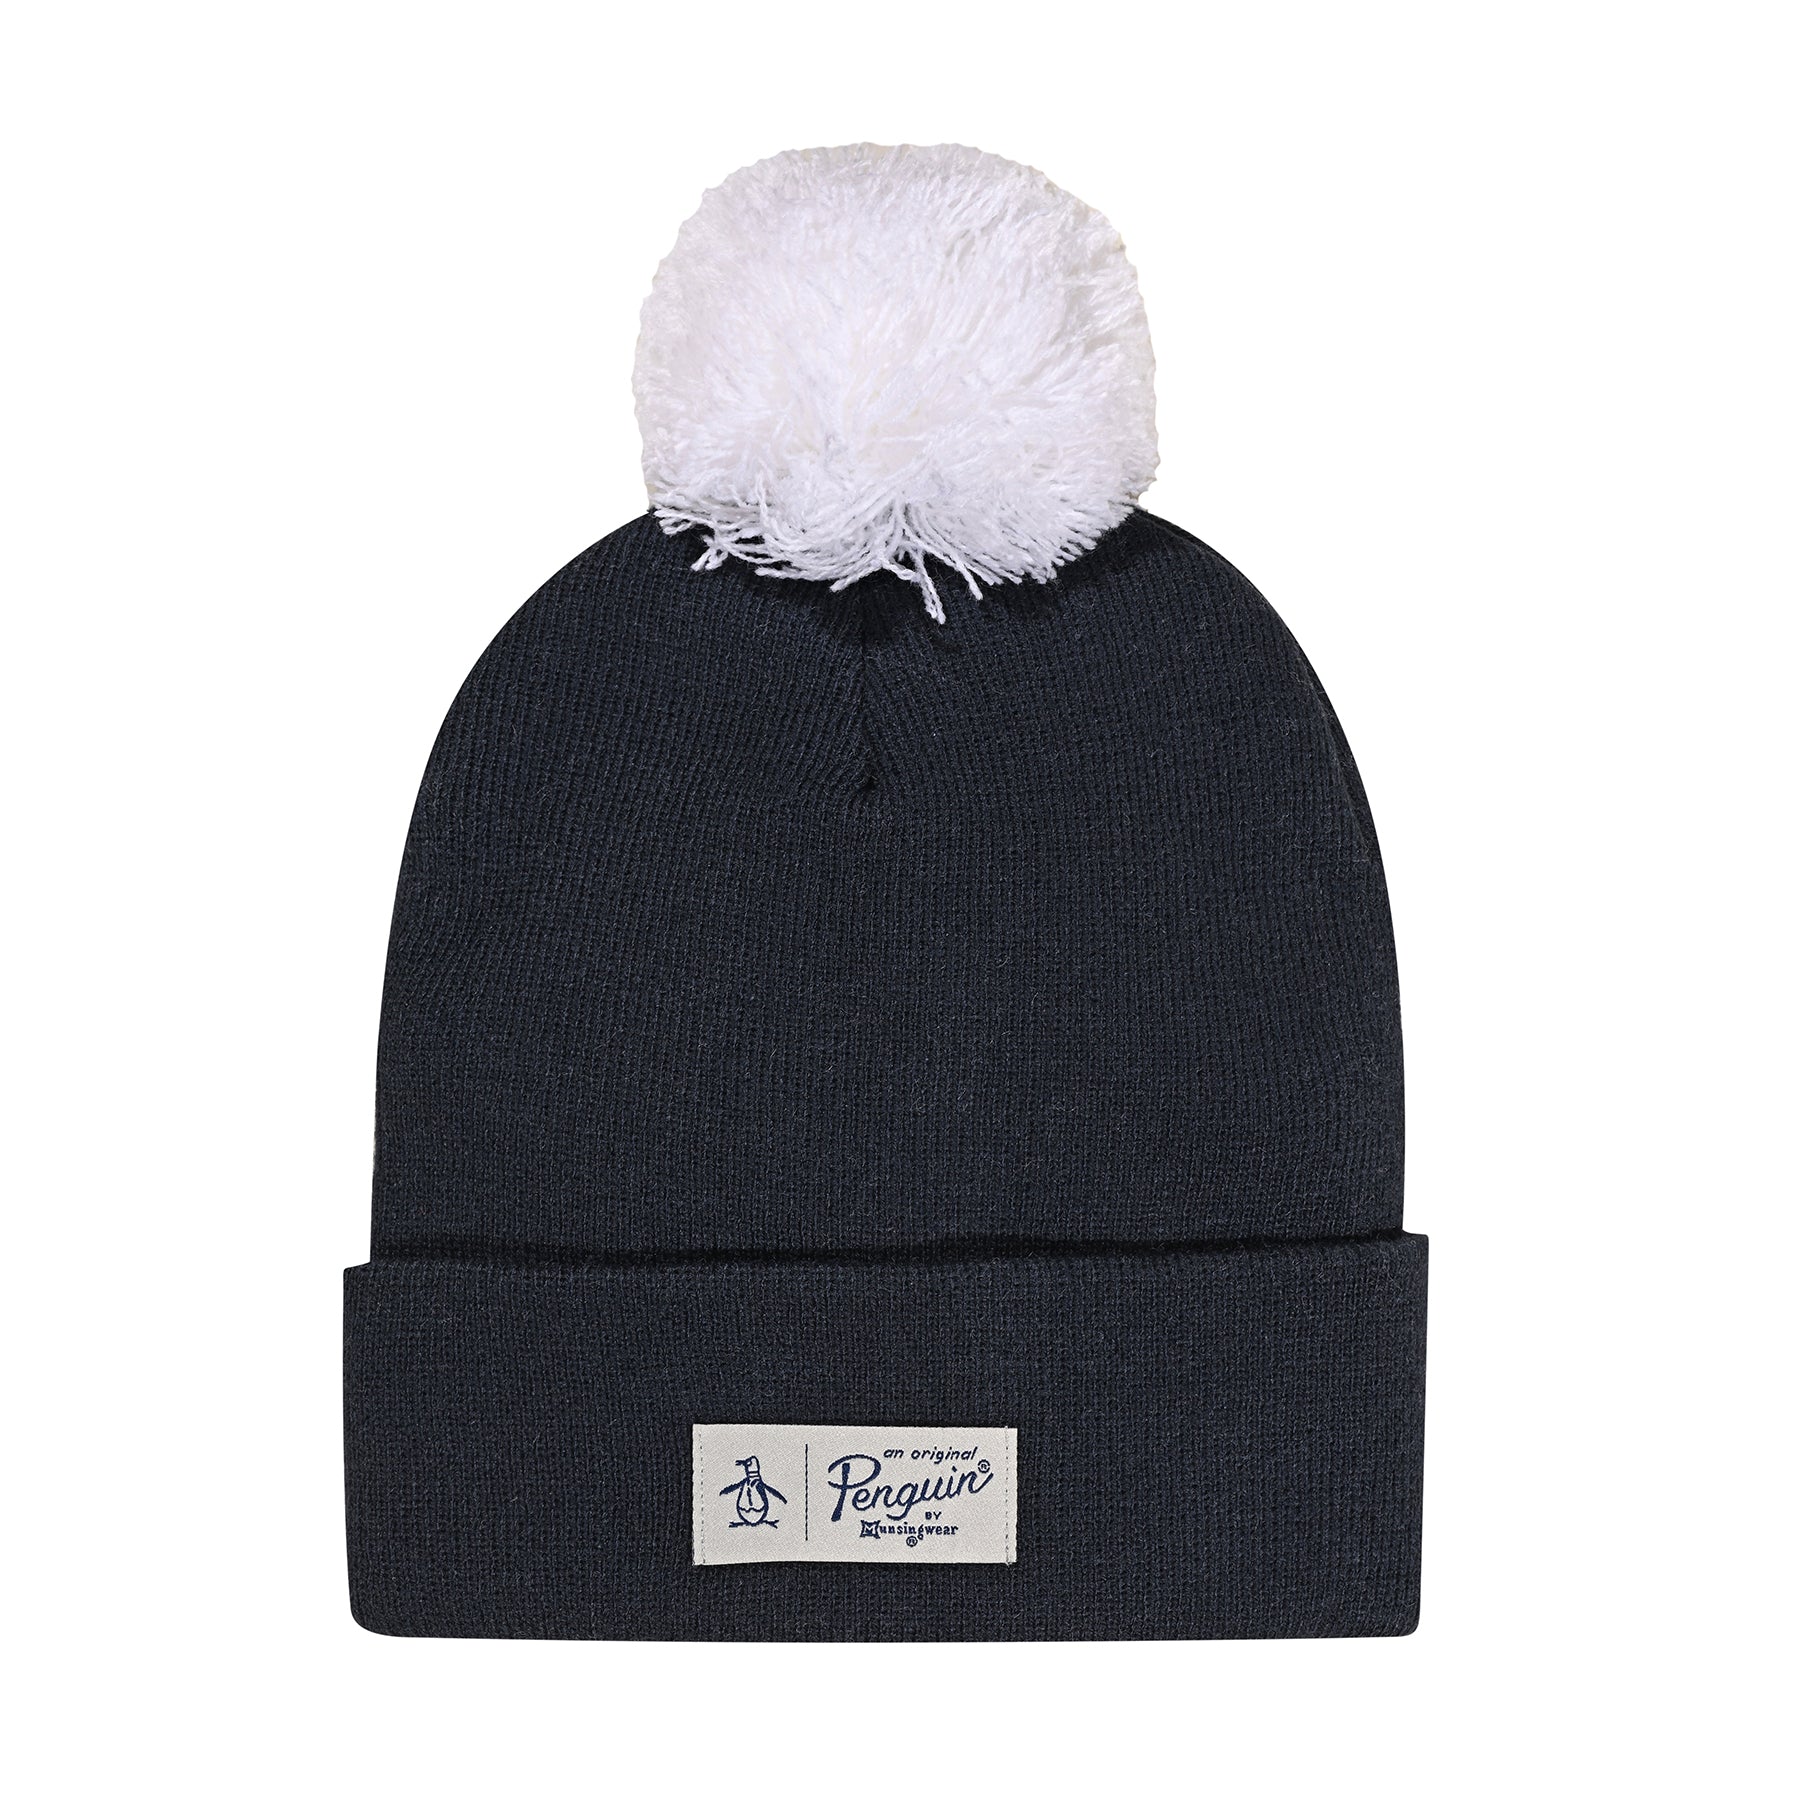 View Mathew Classic Bobble Hat In Navy information